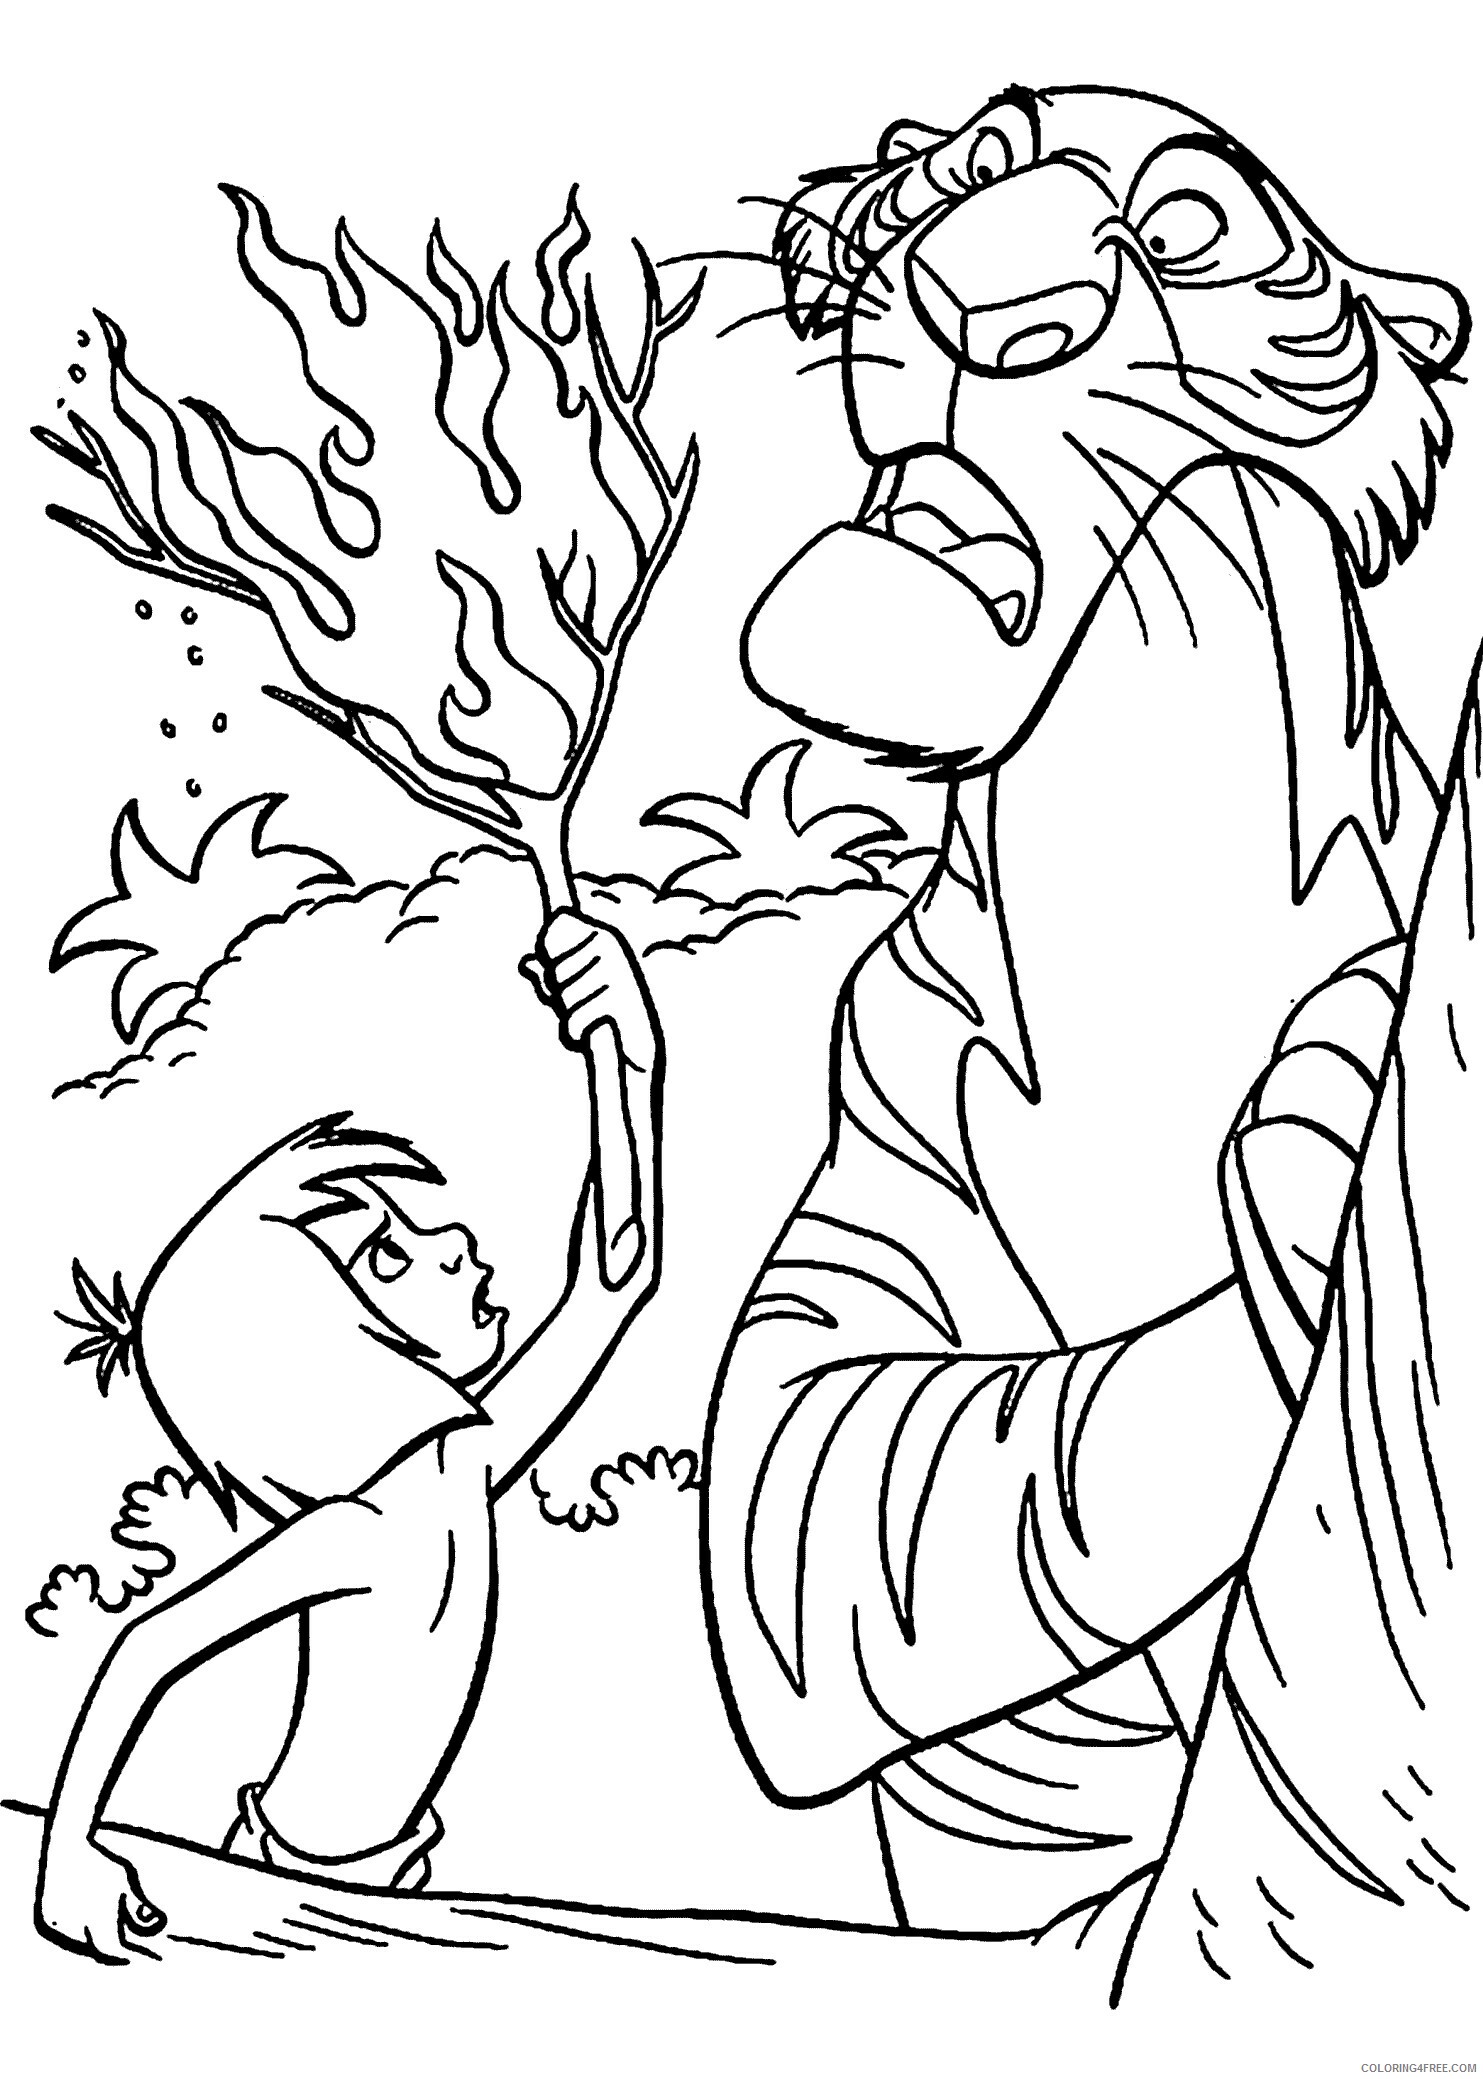 The Jungle Book Coloring Pages TV Film Jungle Book Free Printable 2020 08987 Coloring4free